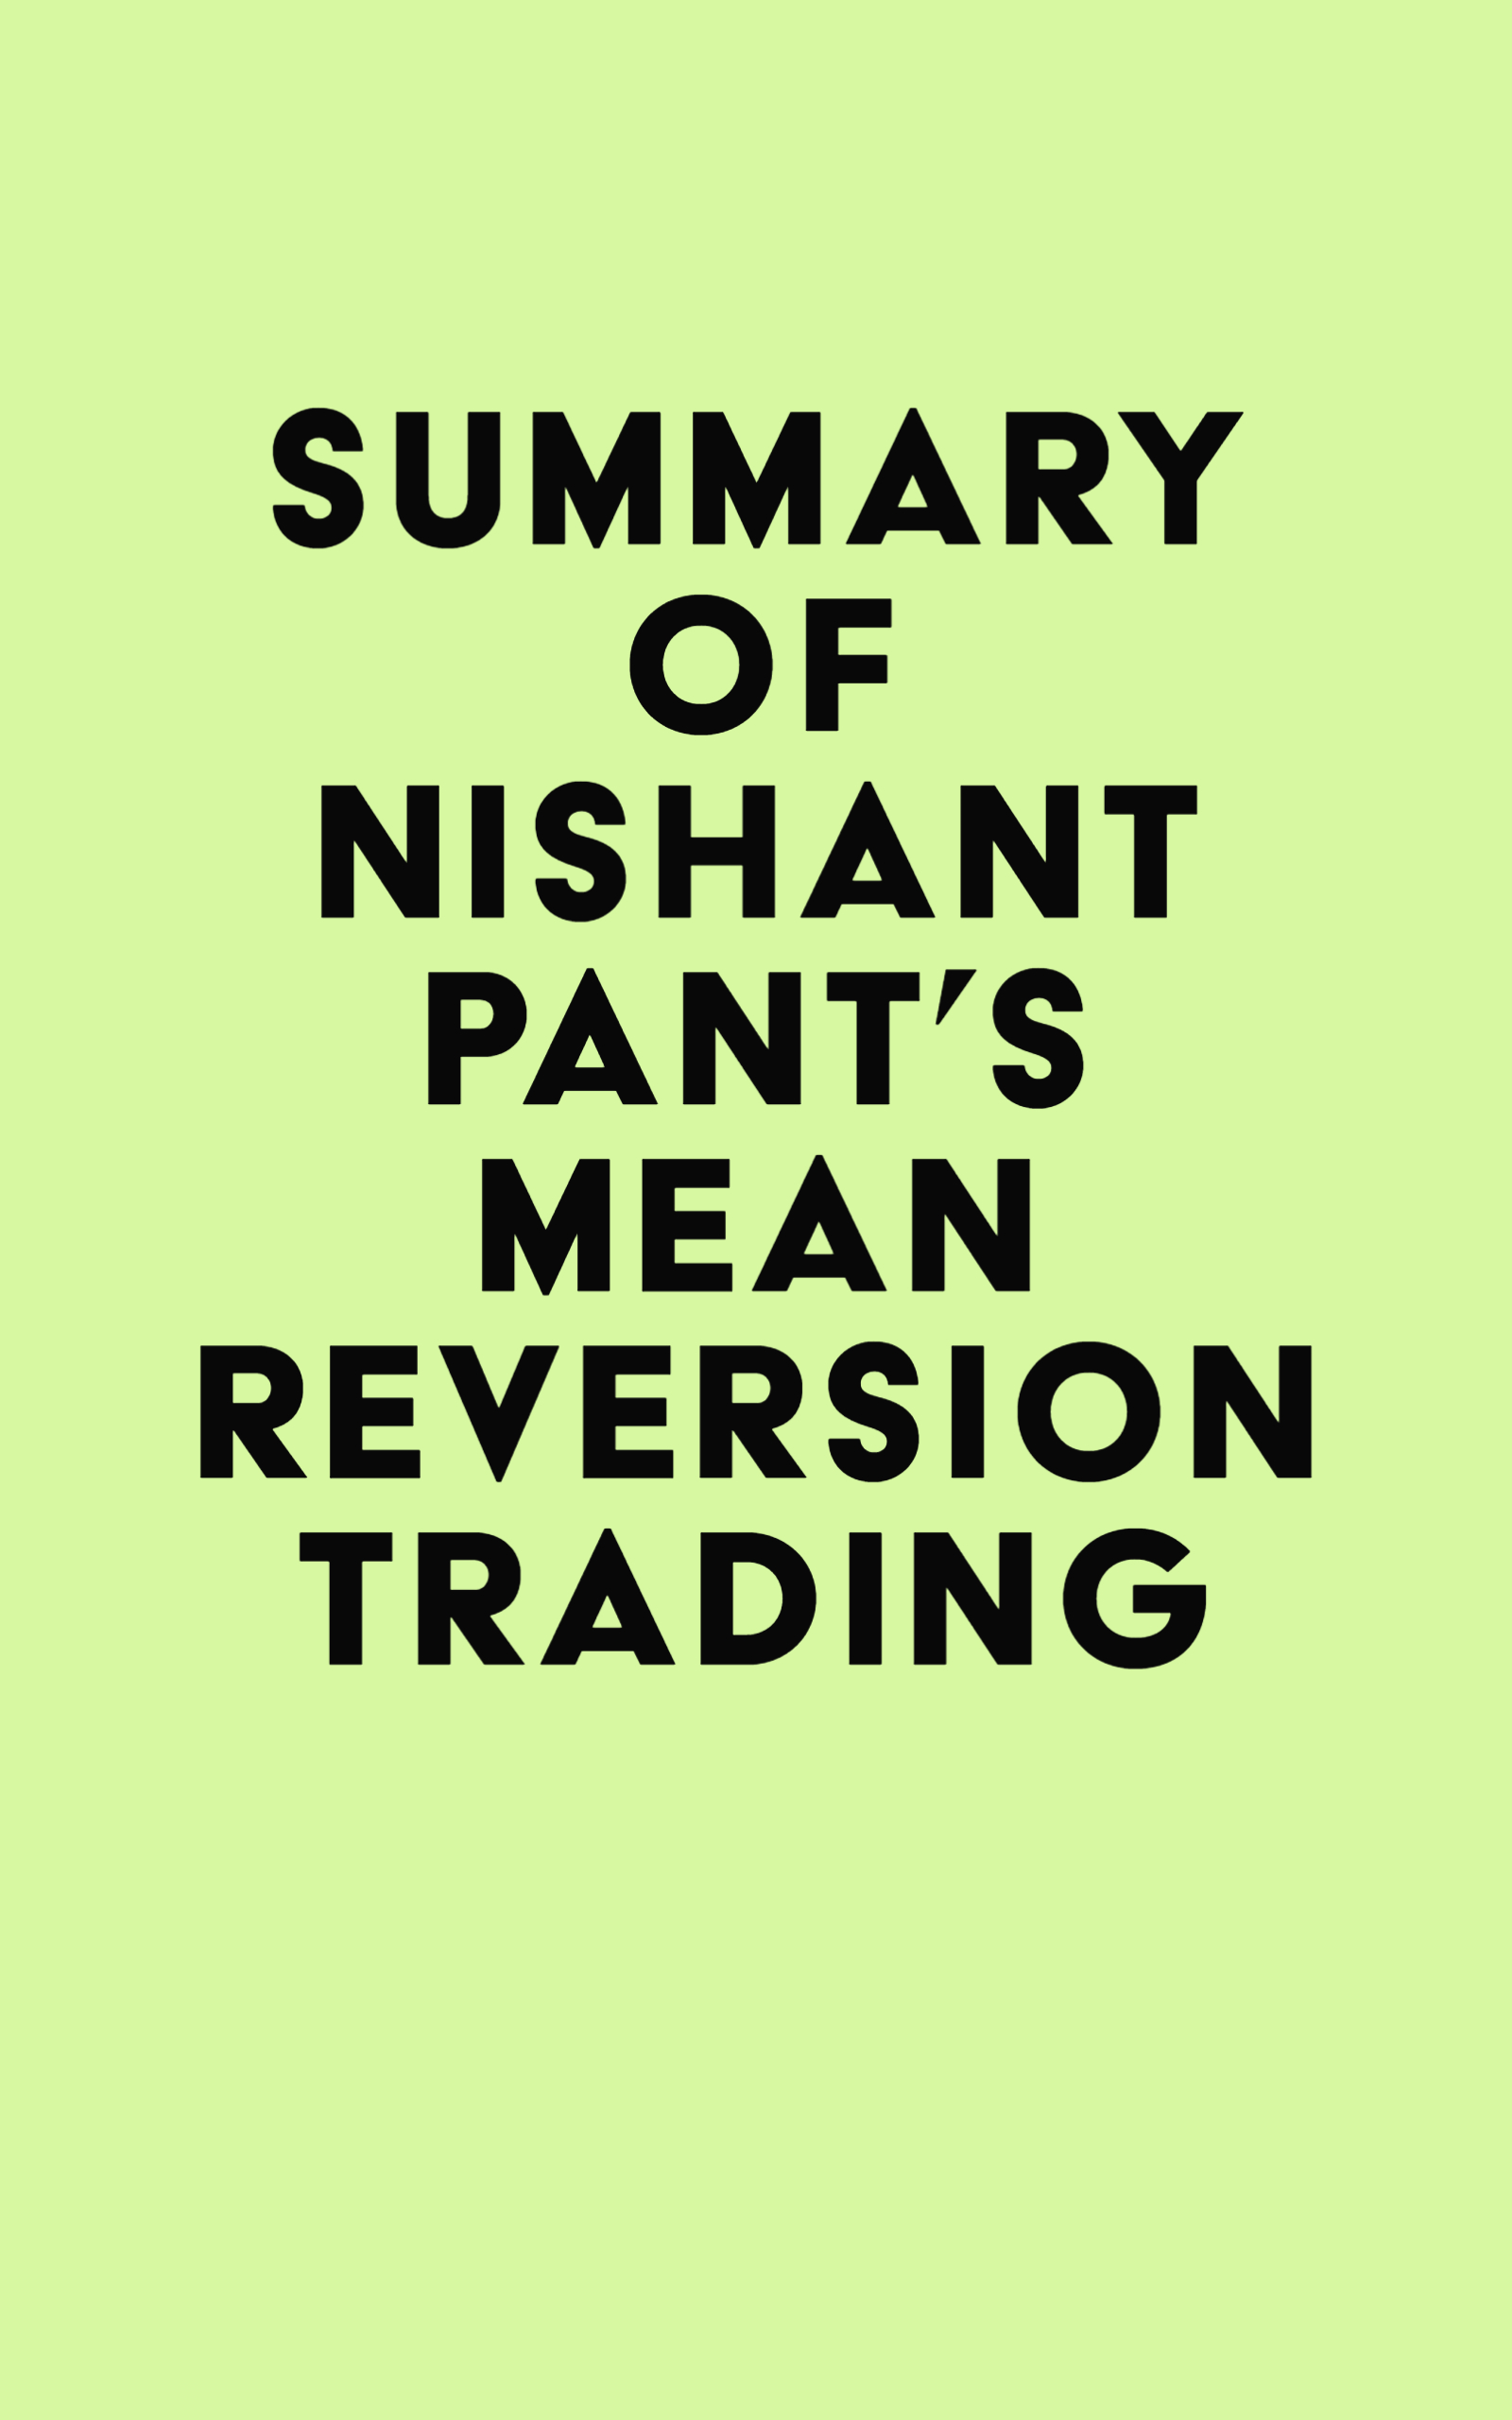 Summary of Nishant Pant's Mean Reversion Trading